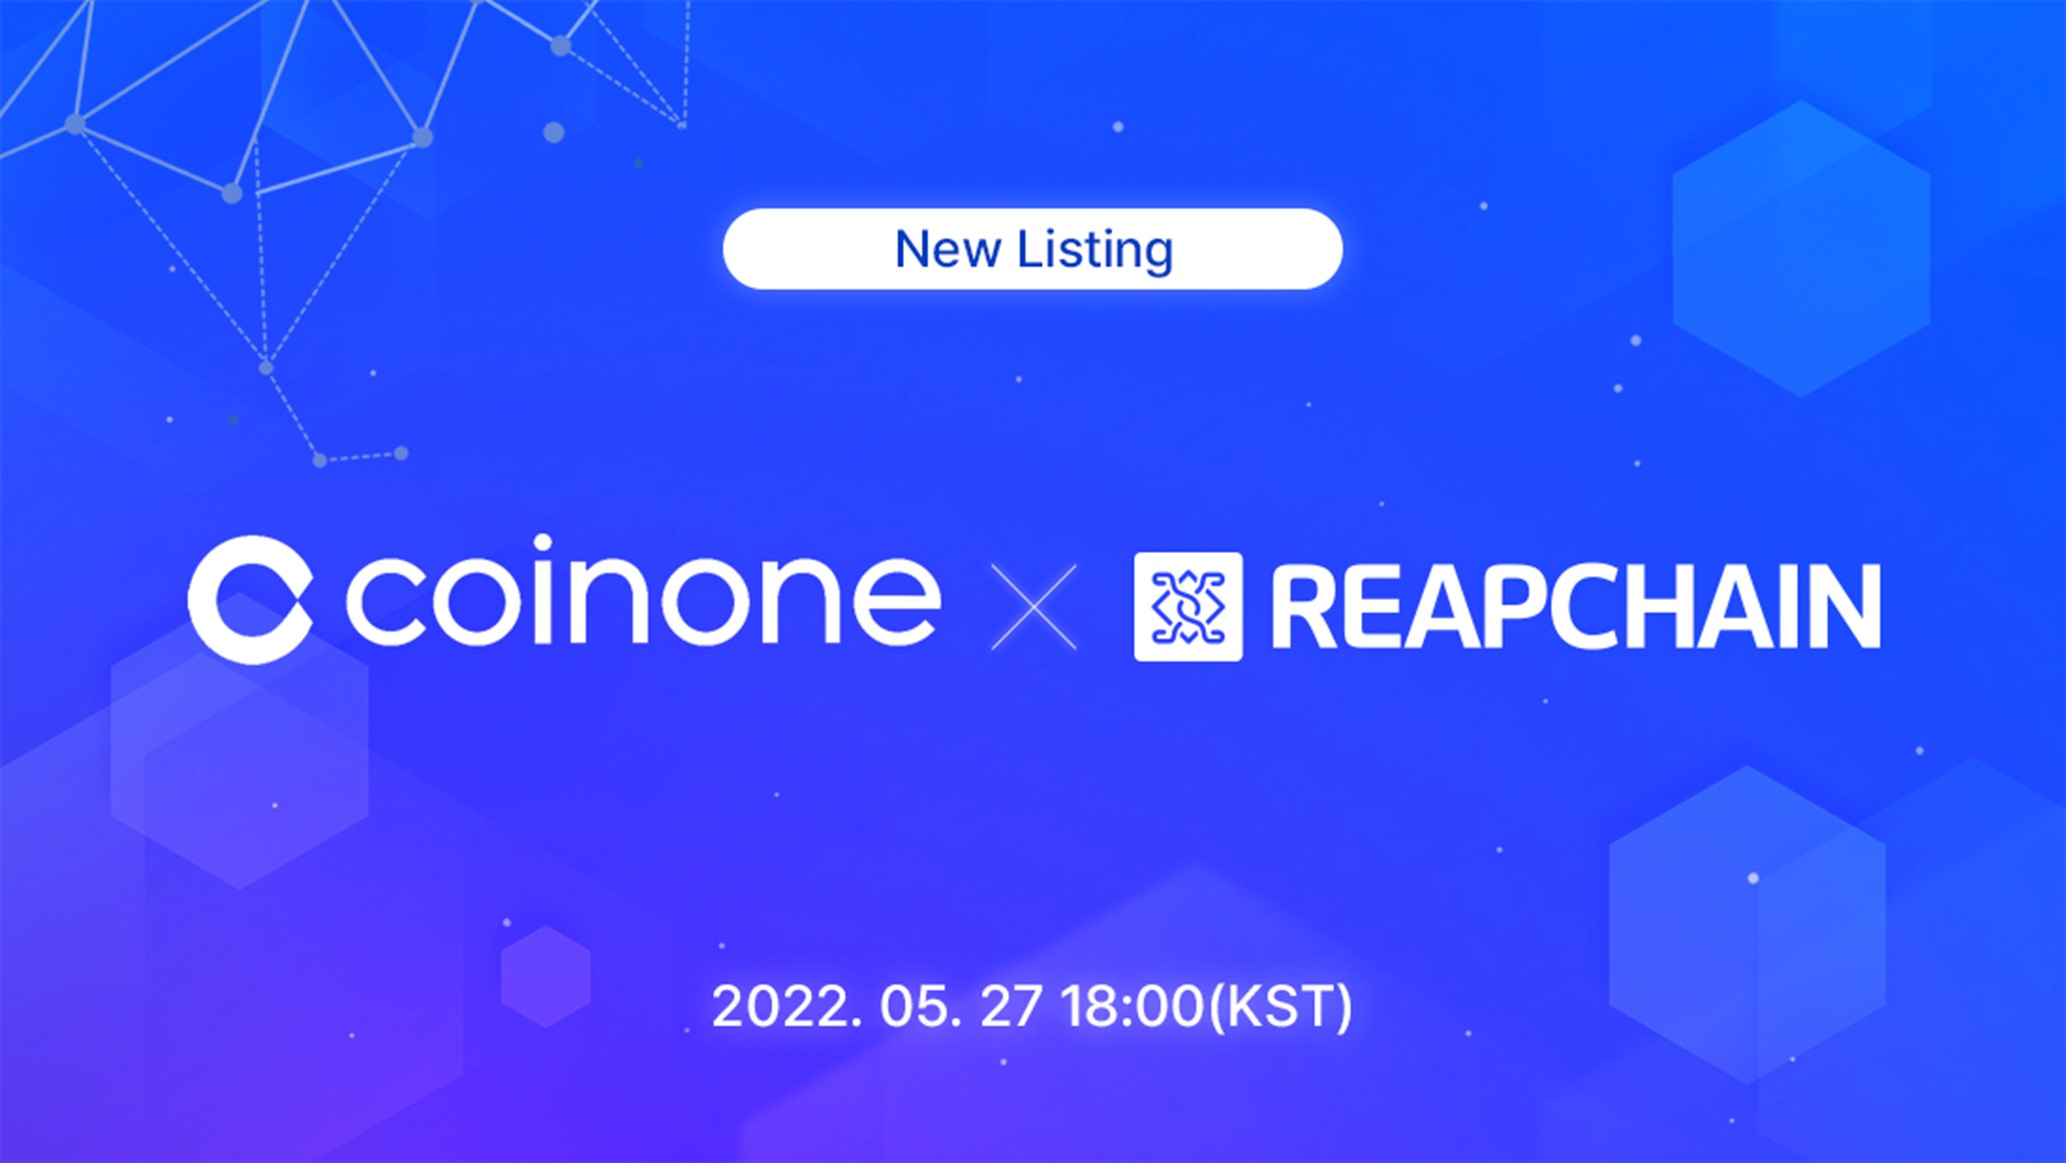 ReapChain, newly listed on the domestic virtual asset exchange Coinone